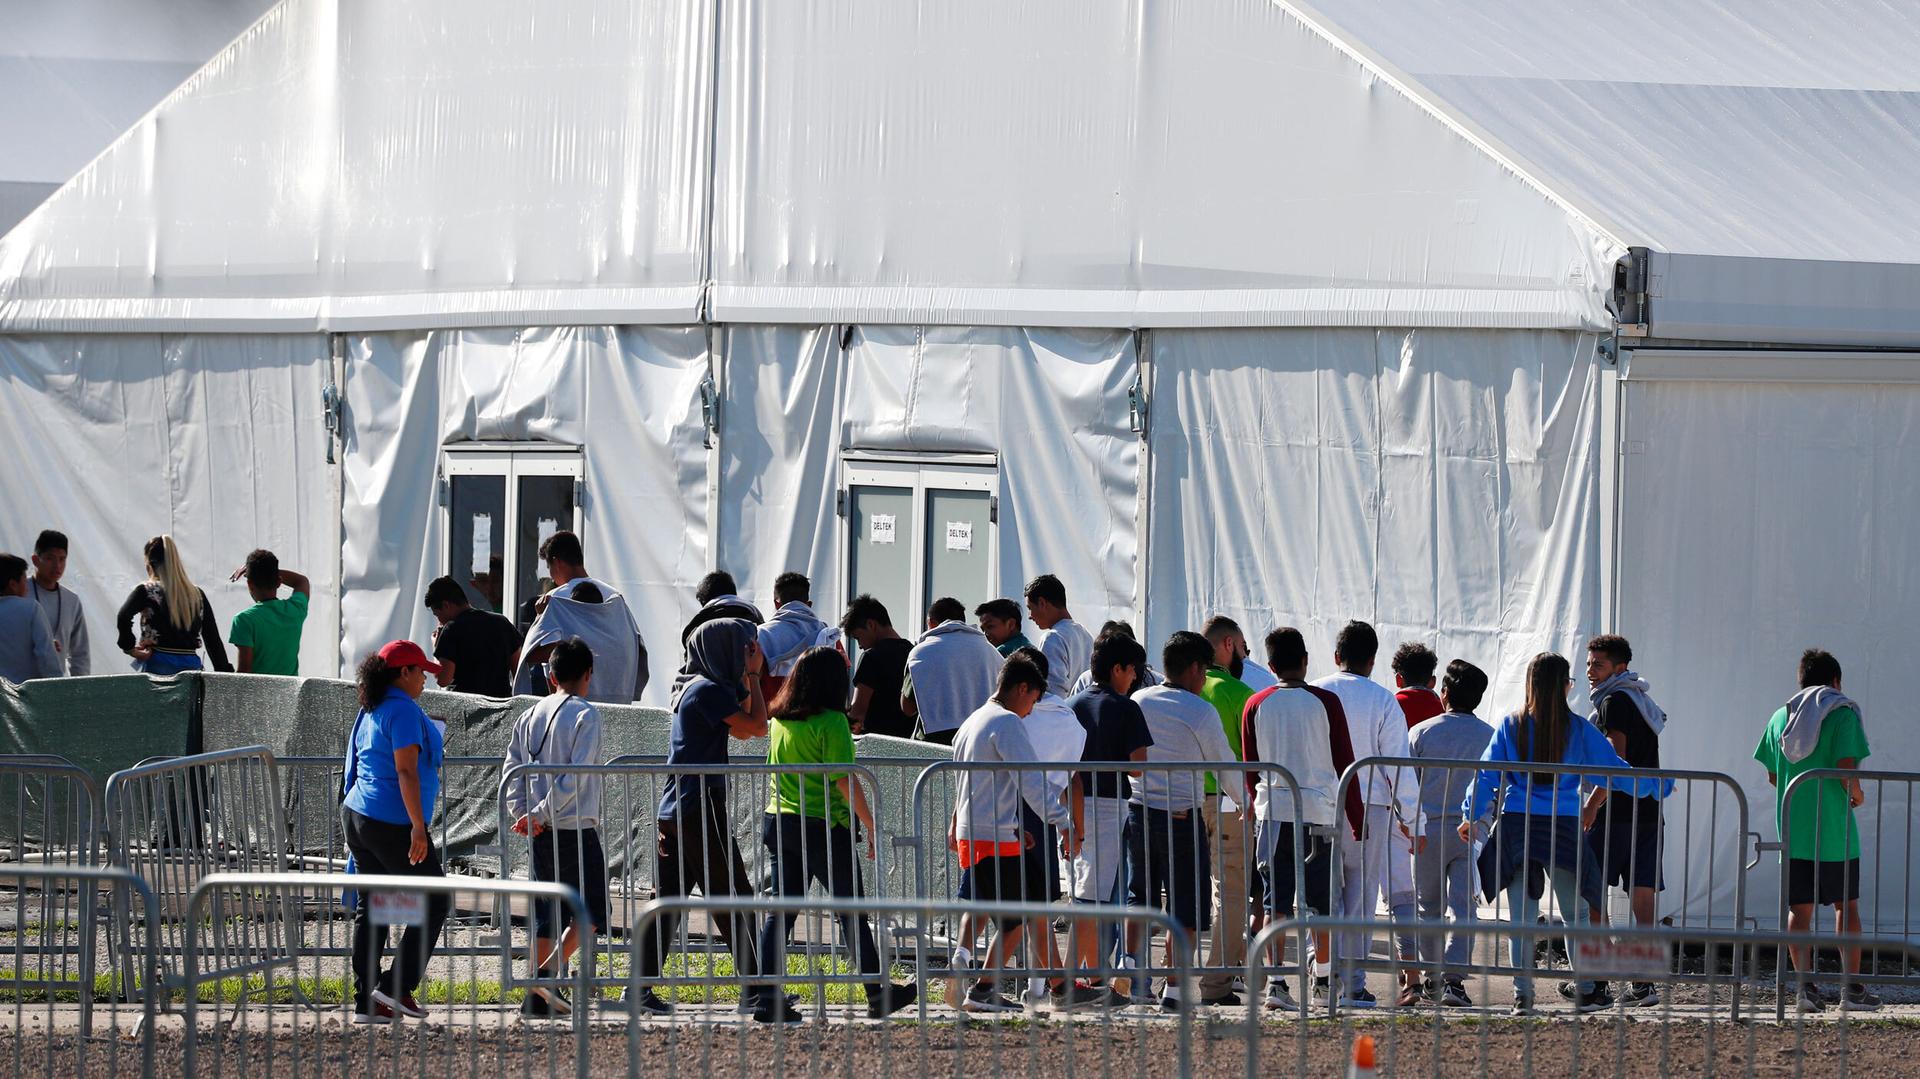 Children line up to enter a a temporary shelter in Florida, Feb. 2019.